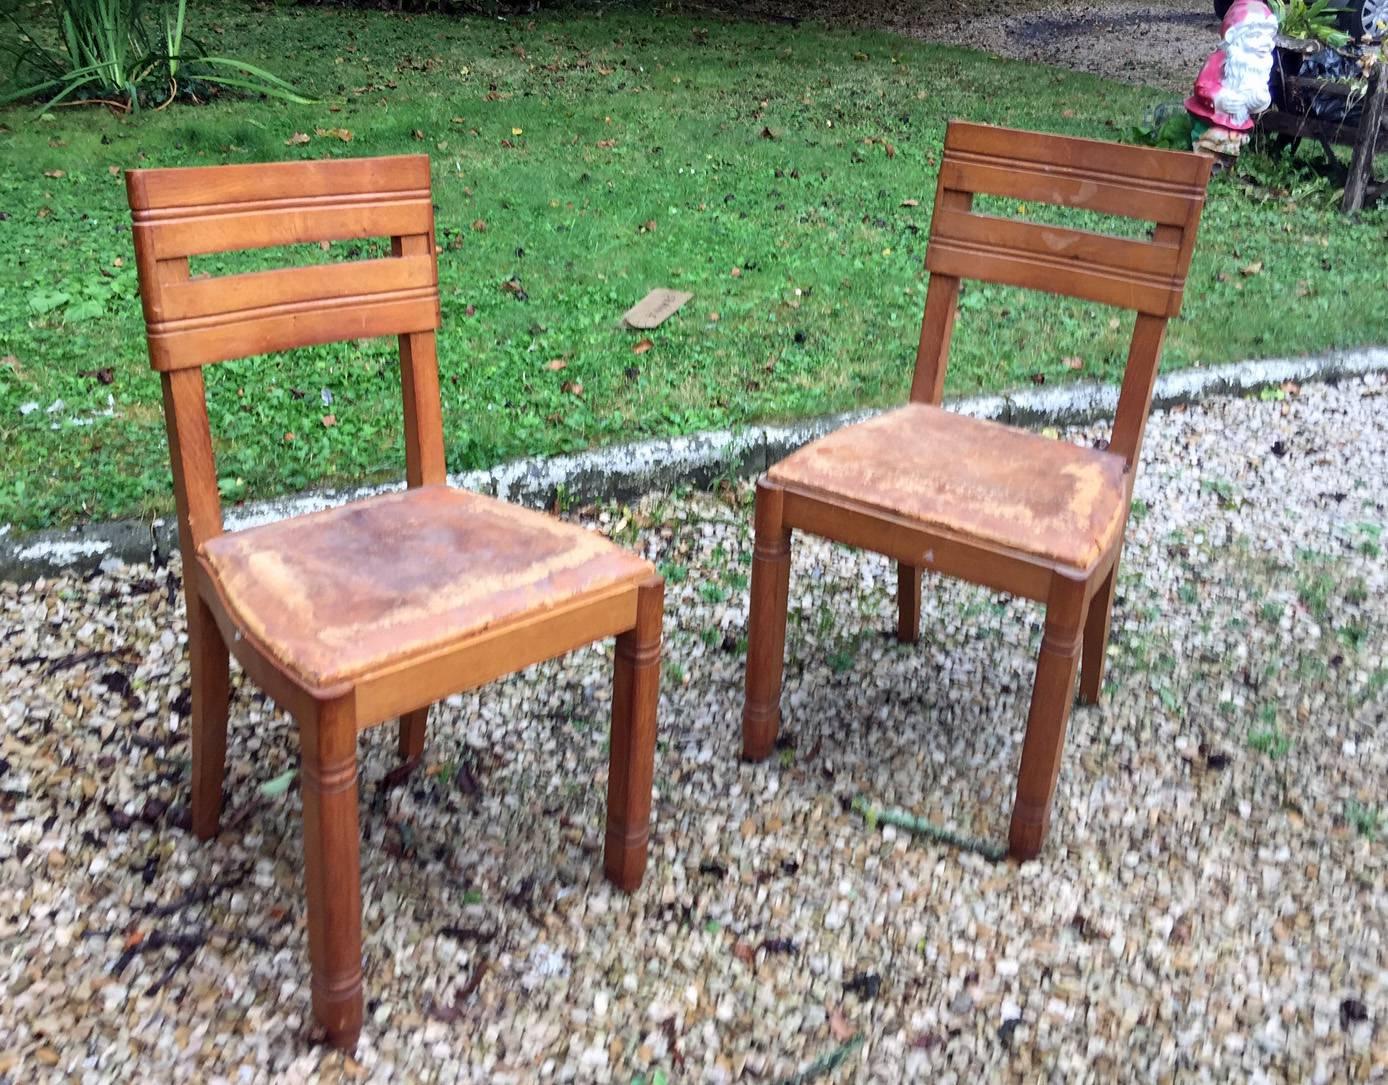 1940 chairs